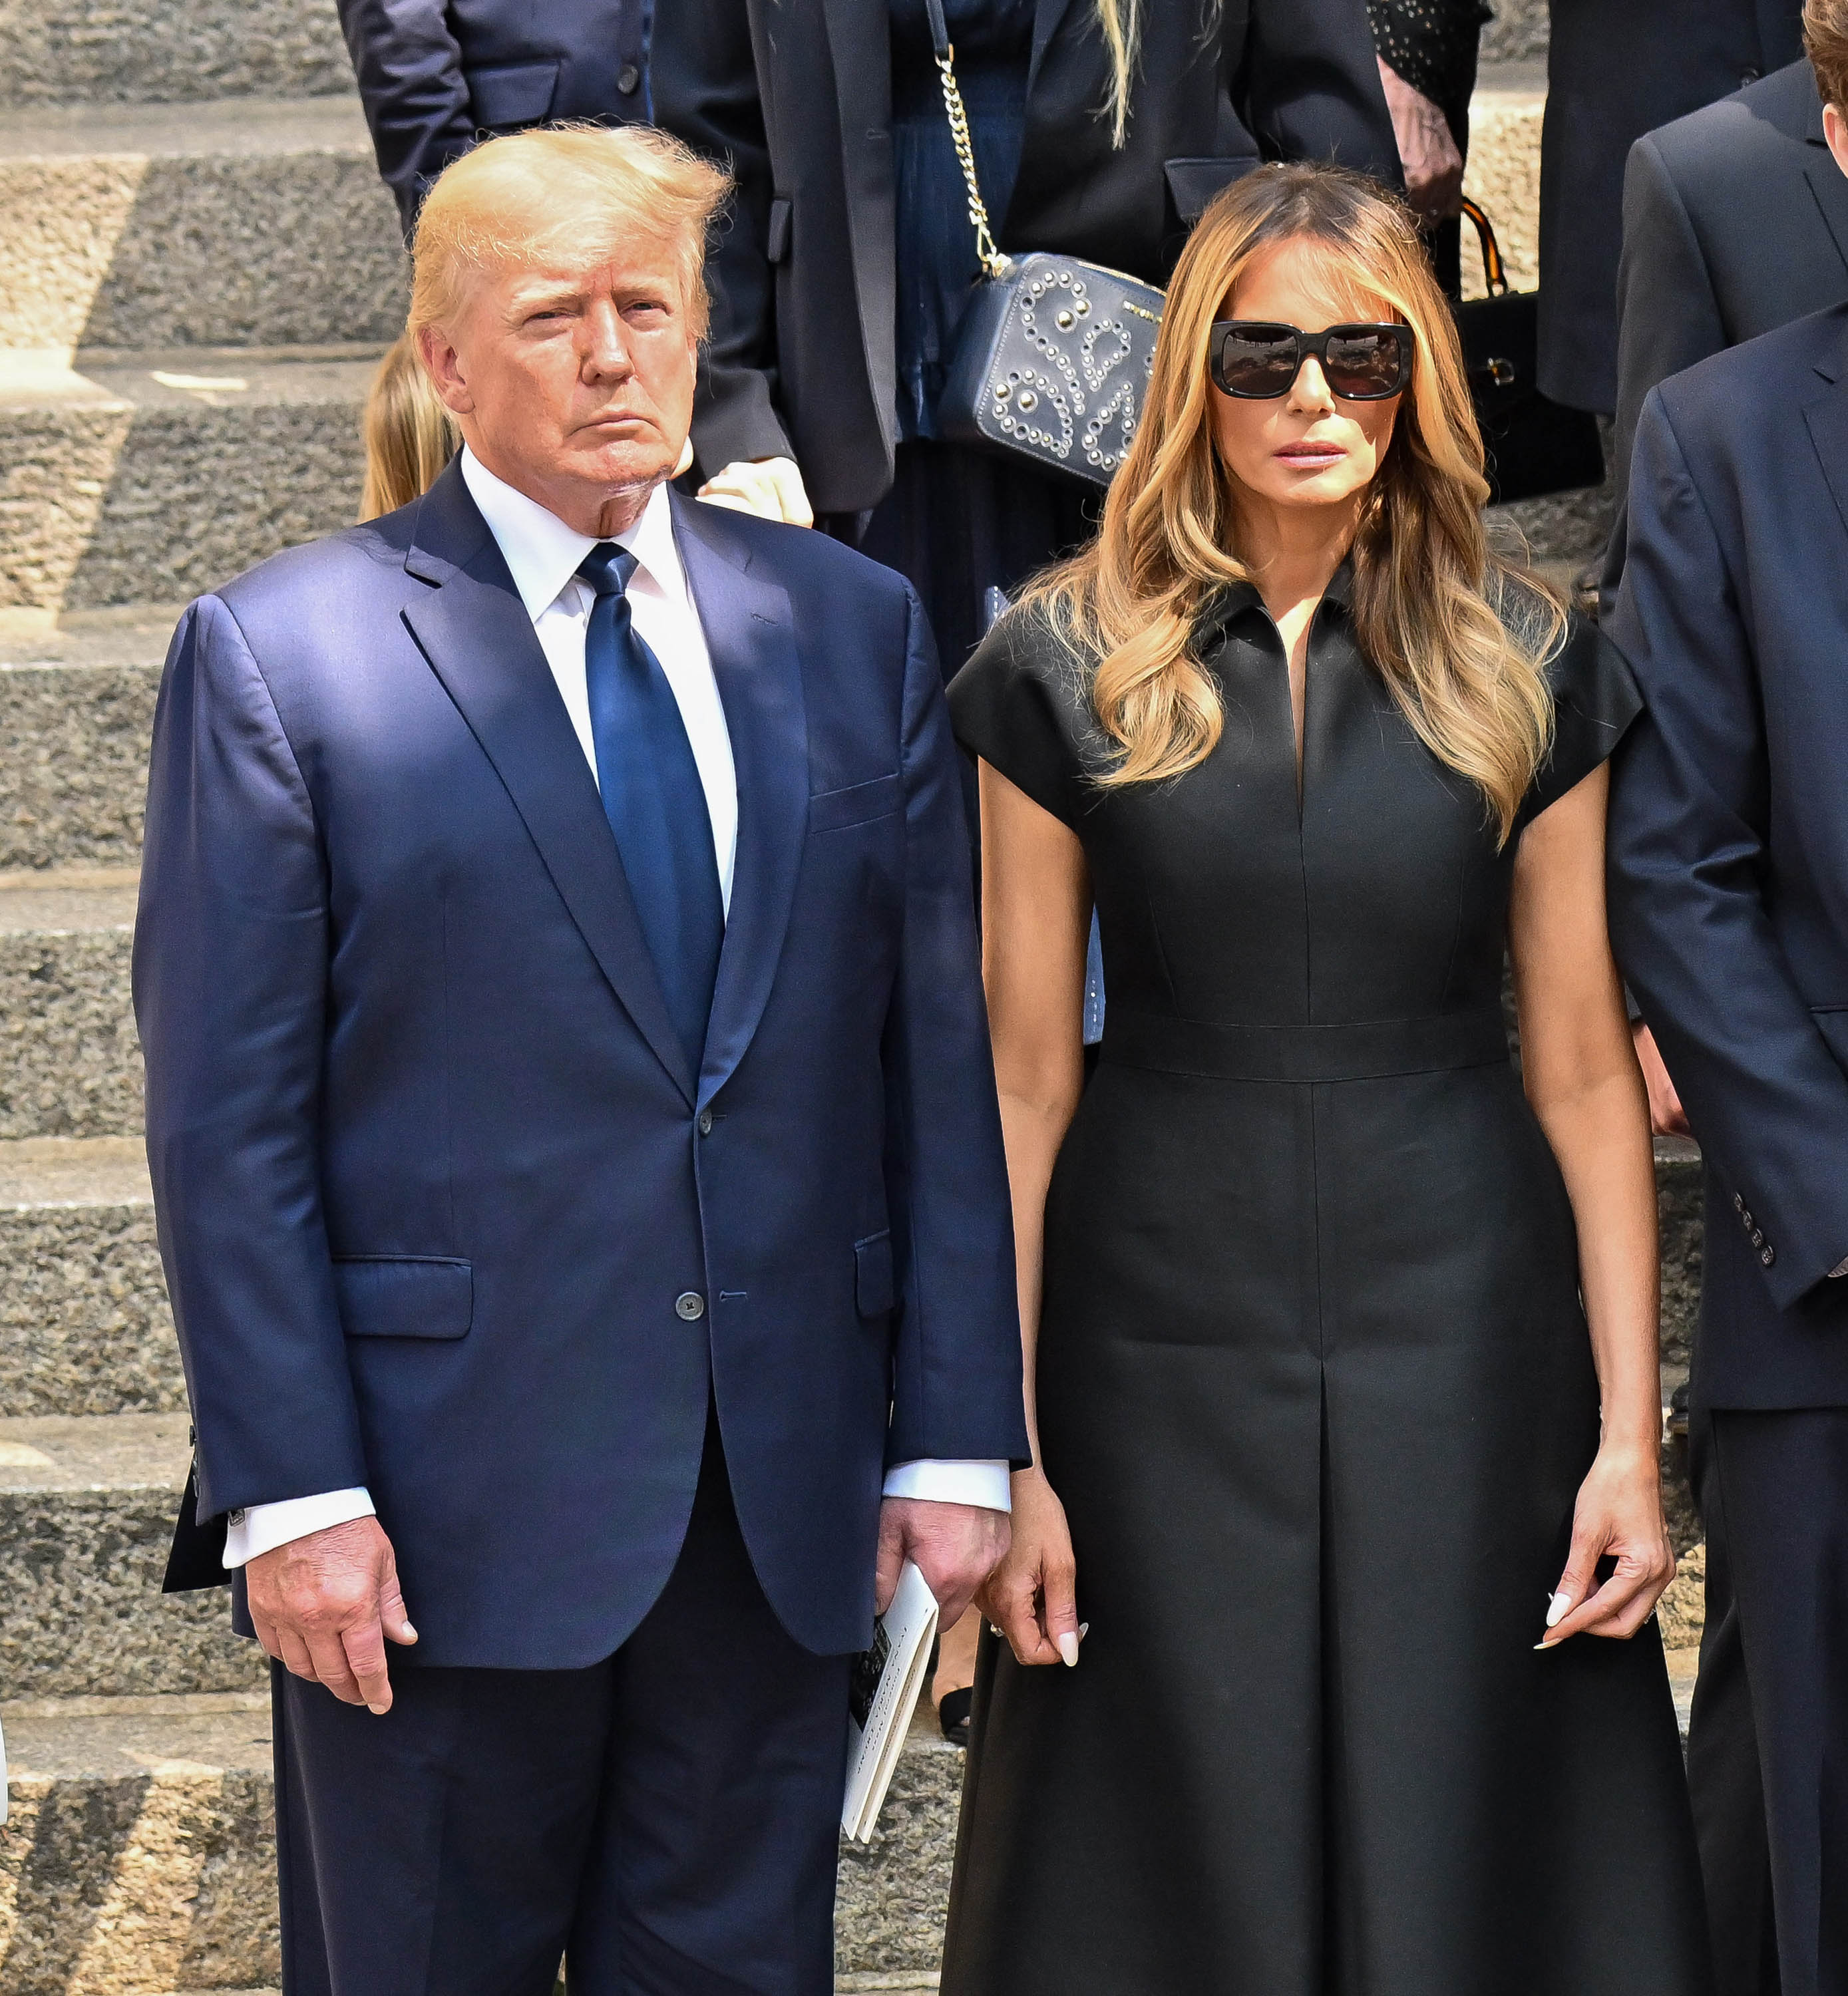 Former U.S. President Donald Trump and former U.S. First Lady Melania Trump photographed at the funeral of Ivana Trump on July 20, 2022 in New York City. / Source: Getty Images